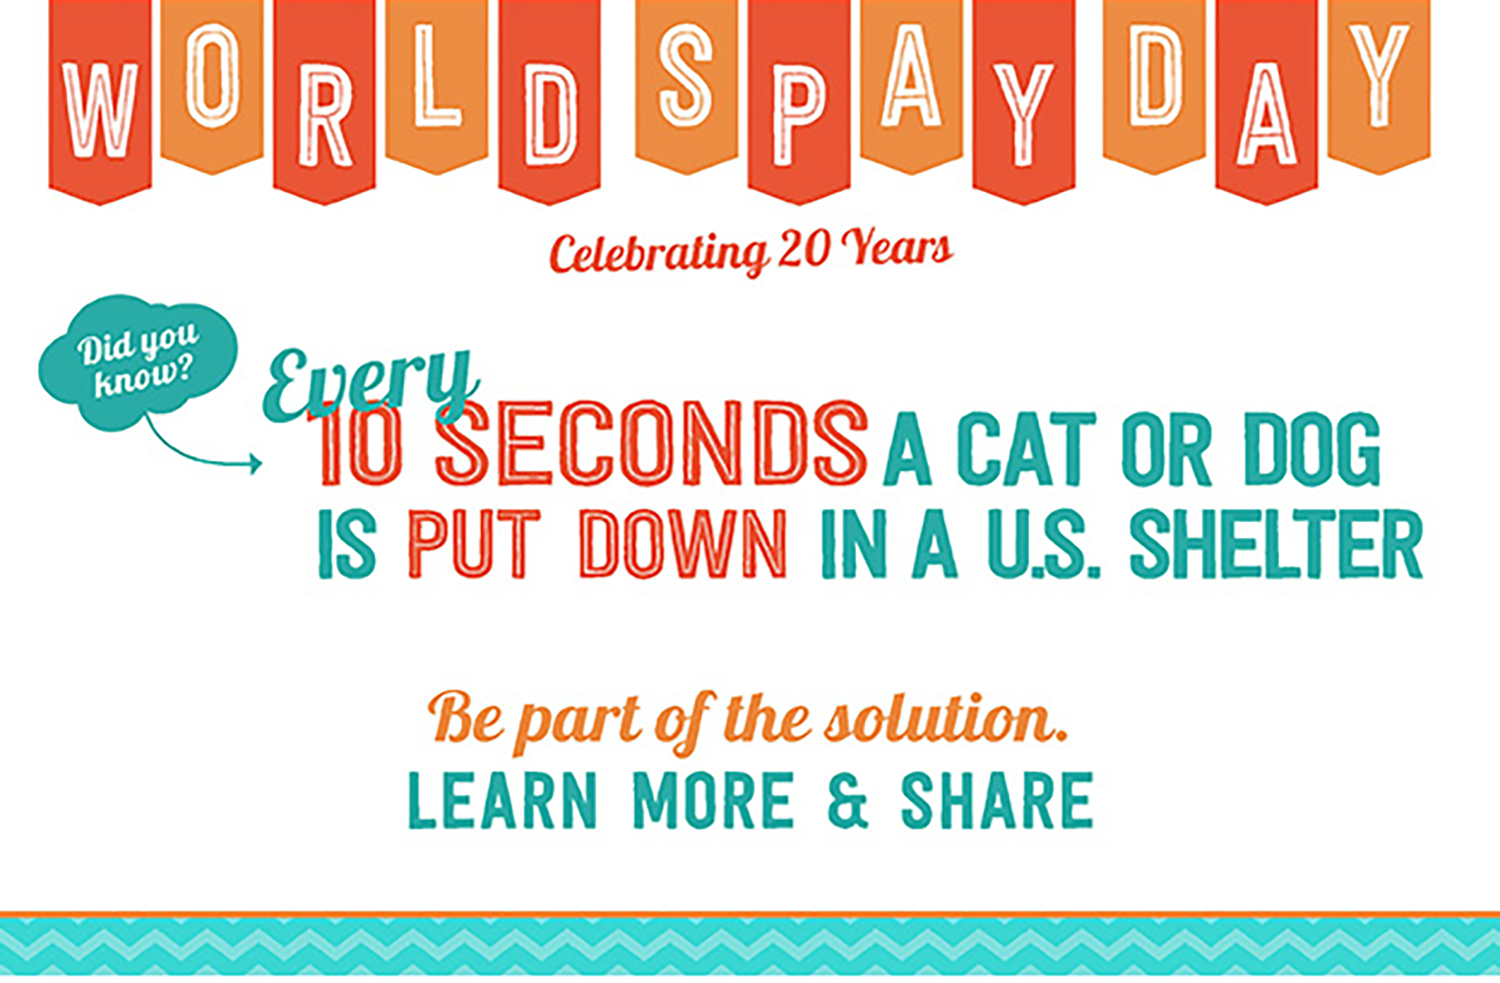 Today Is World Spay Day!